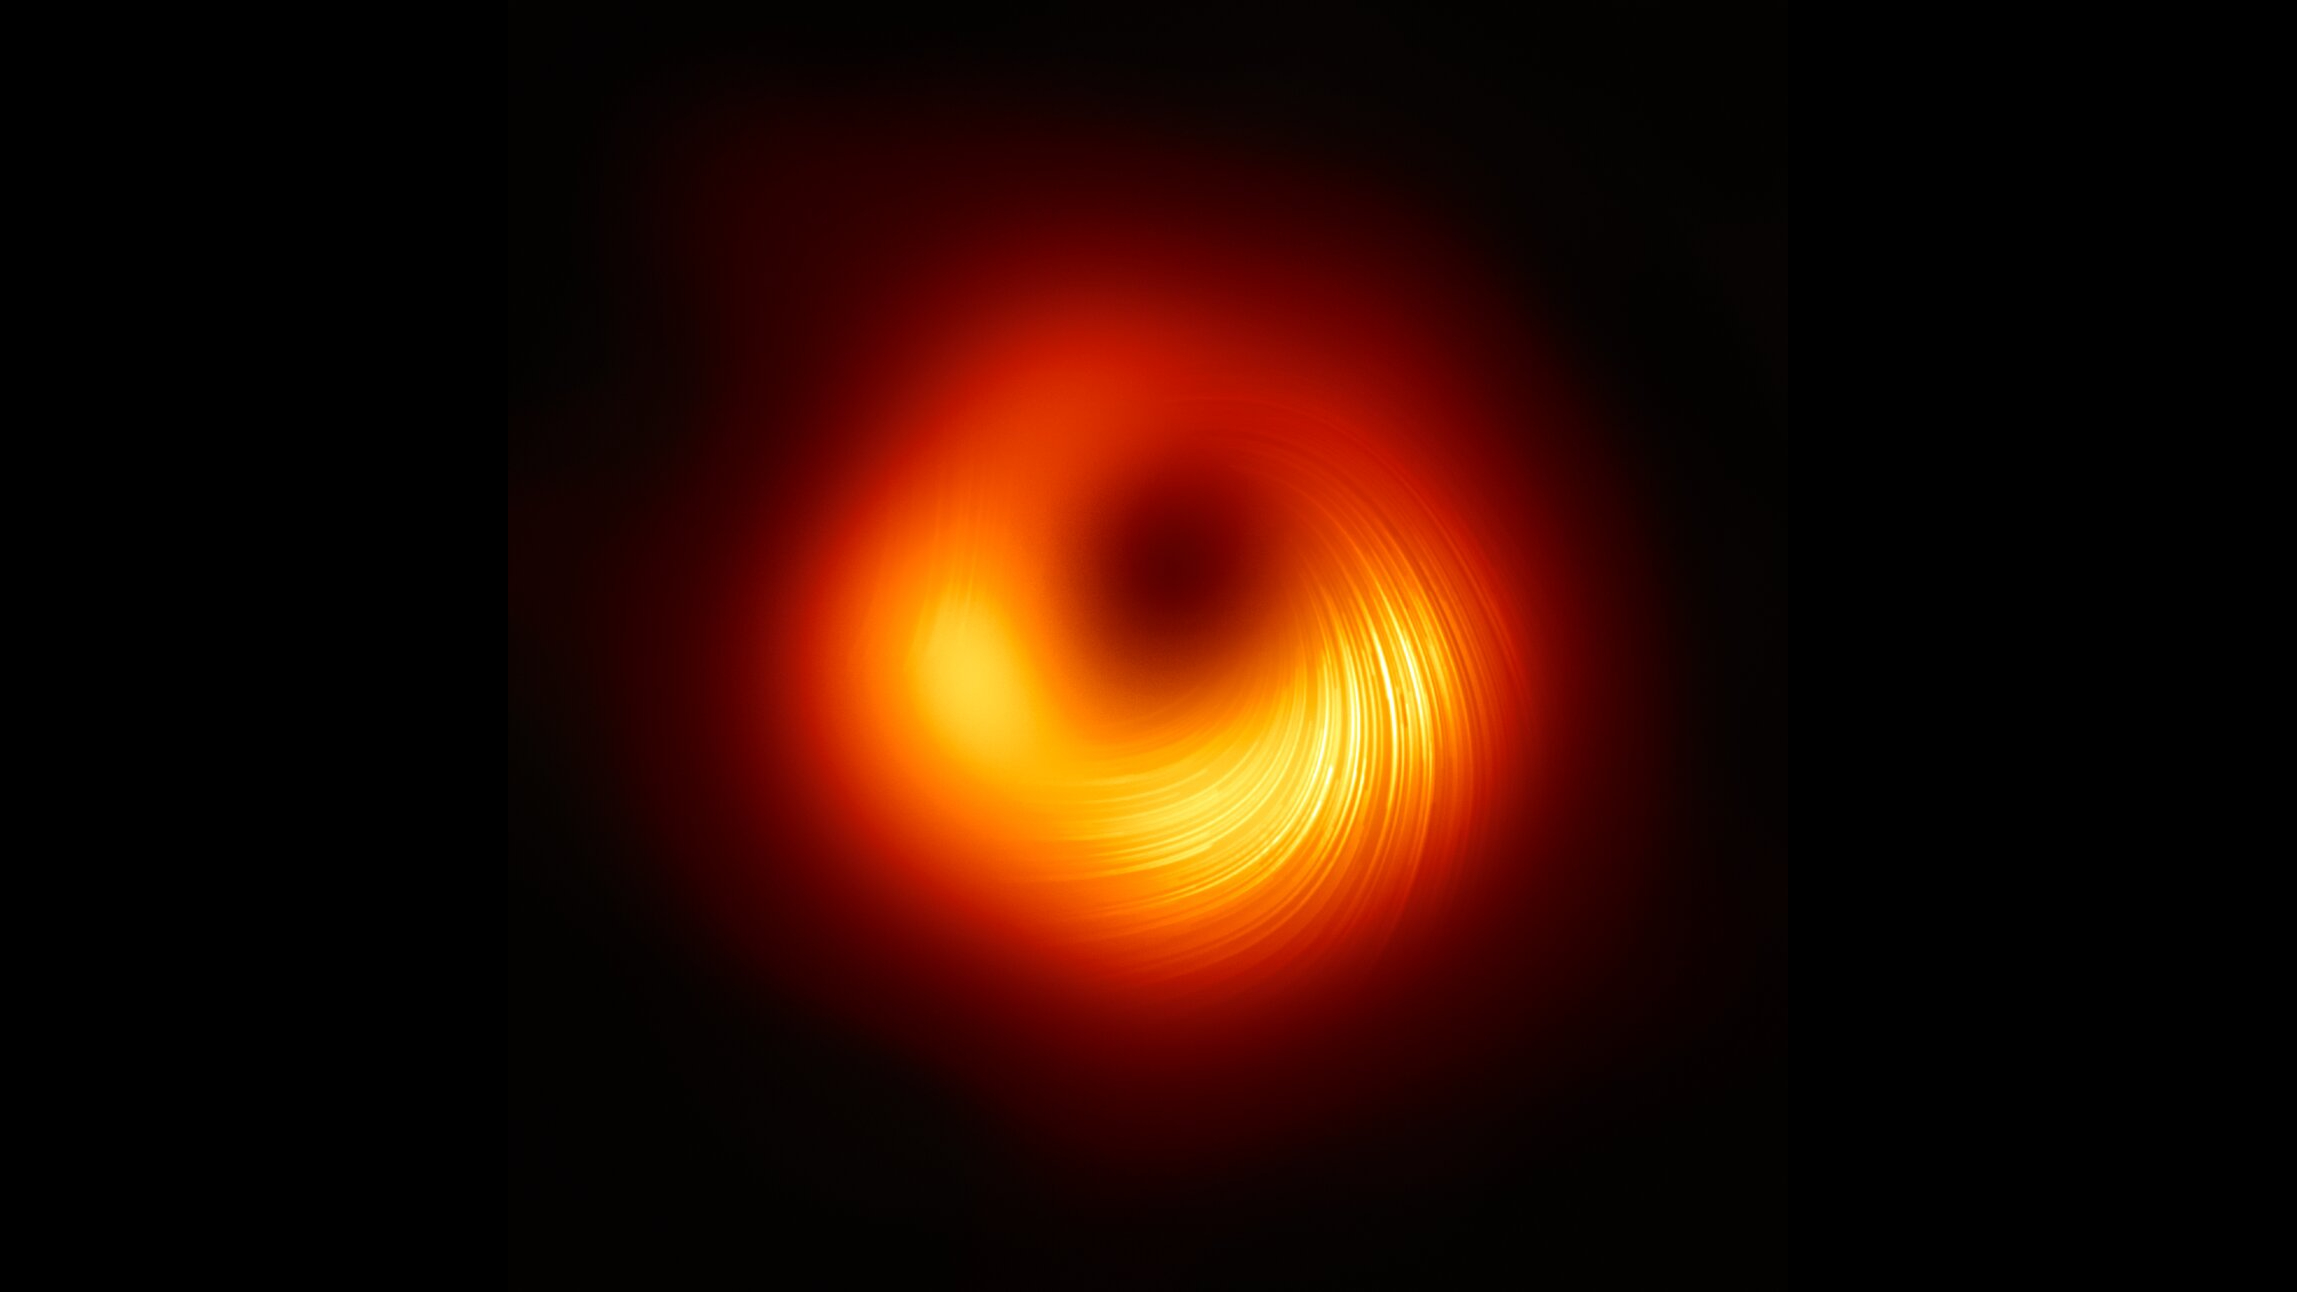 Orange glowing ring with lines of light within surrounding a black circle.